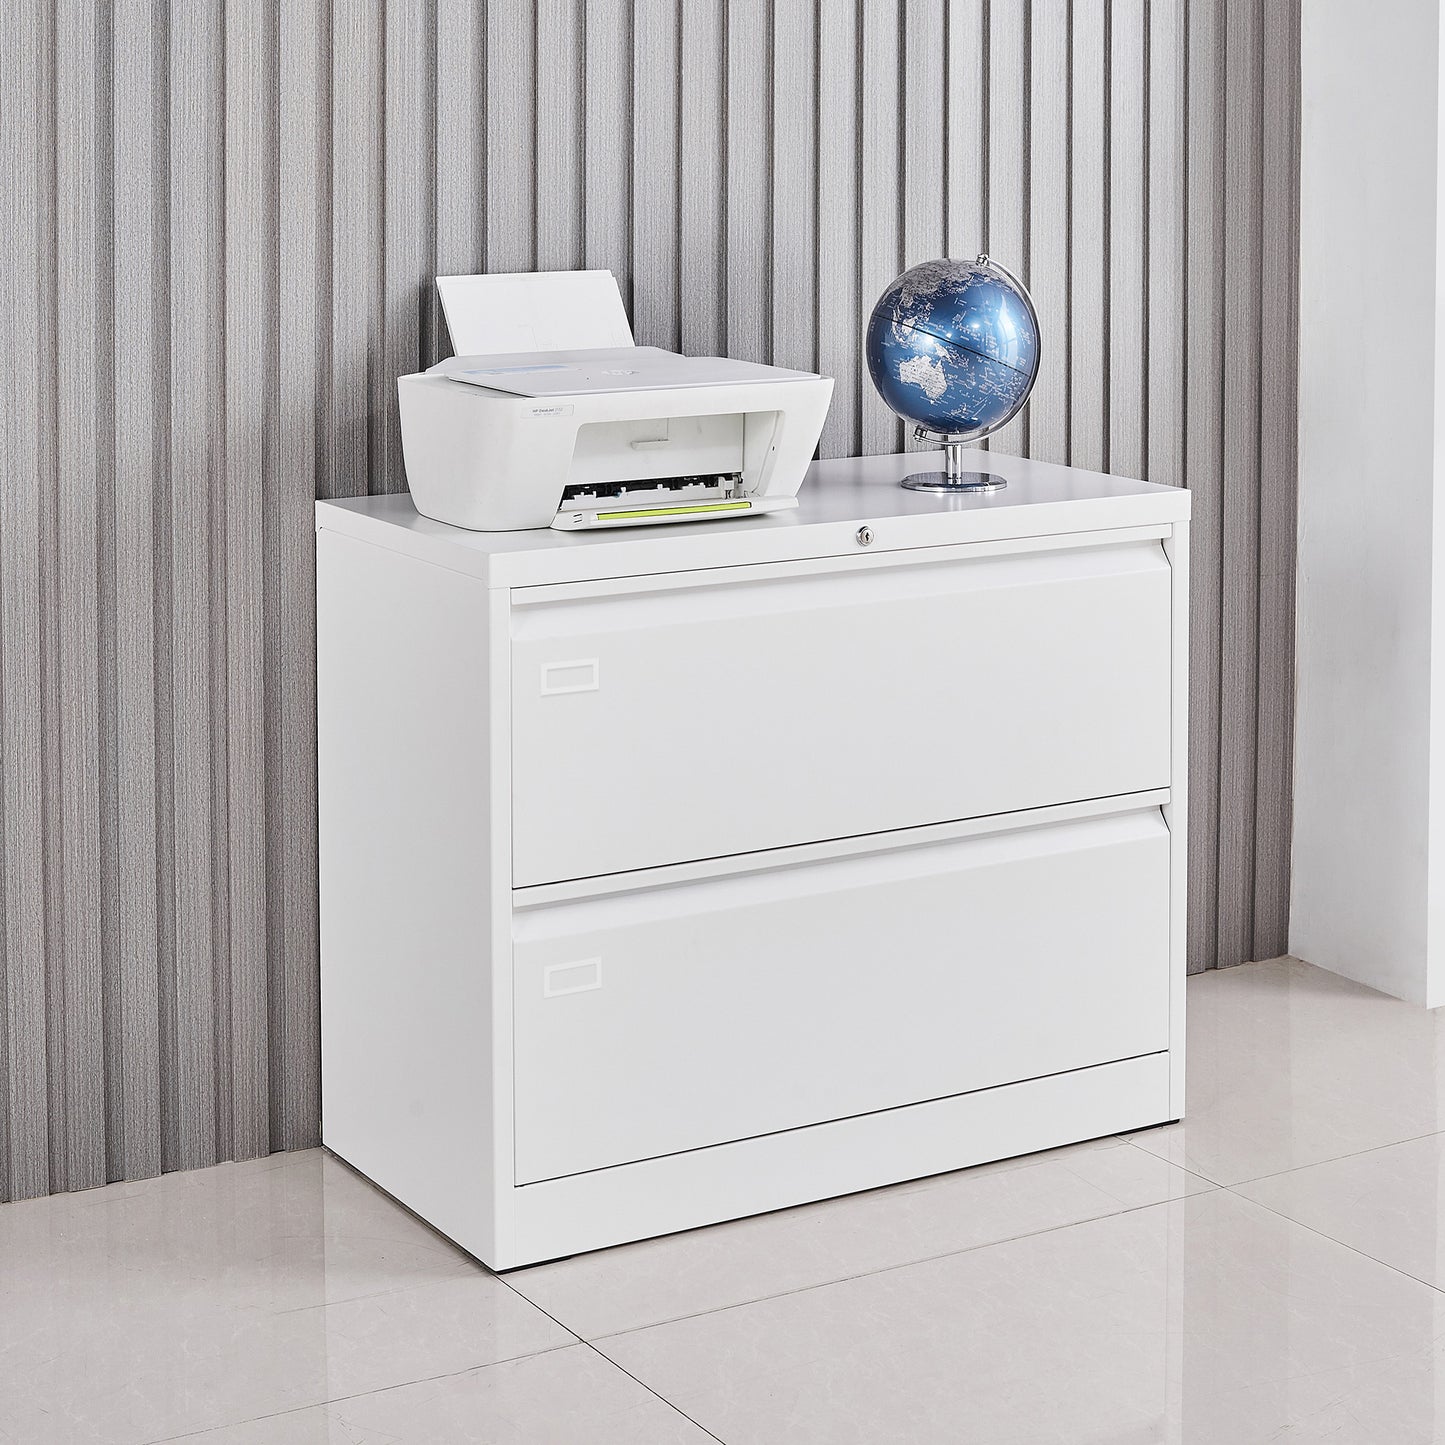 Lockable 2 Drawer Lateral Filing Cabinet for Home Office